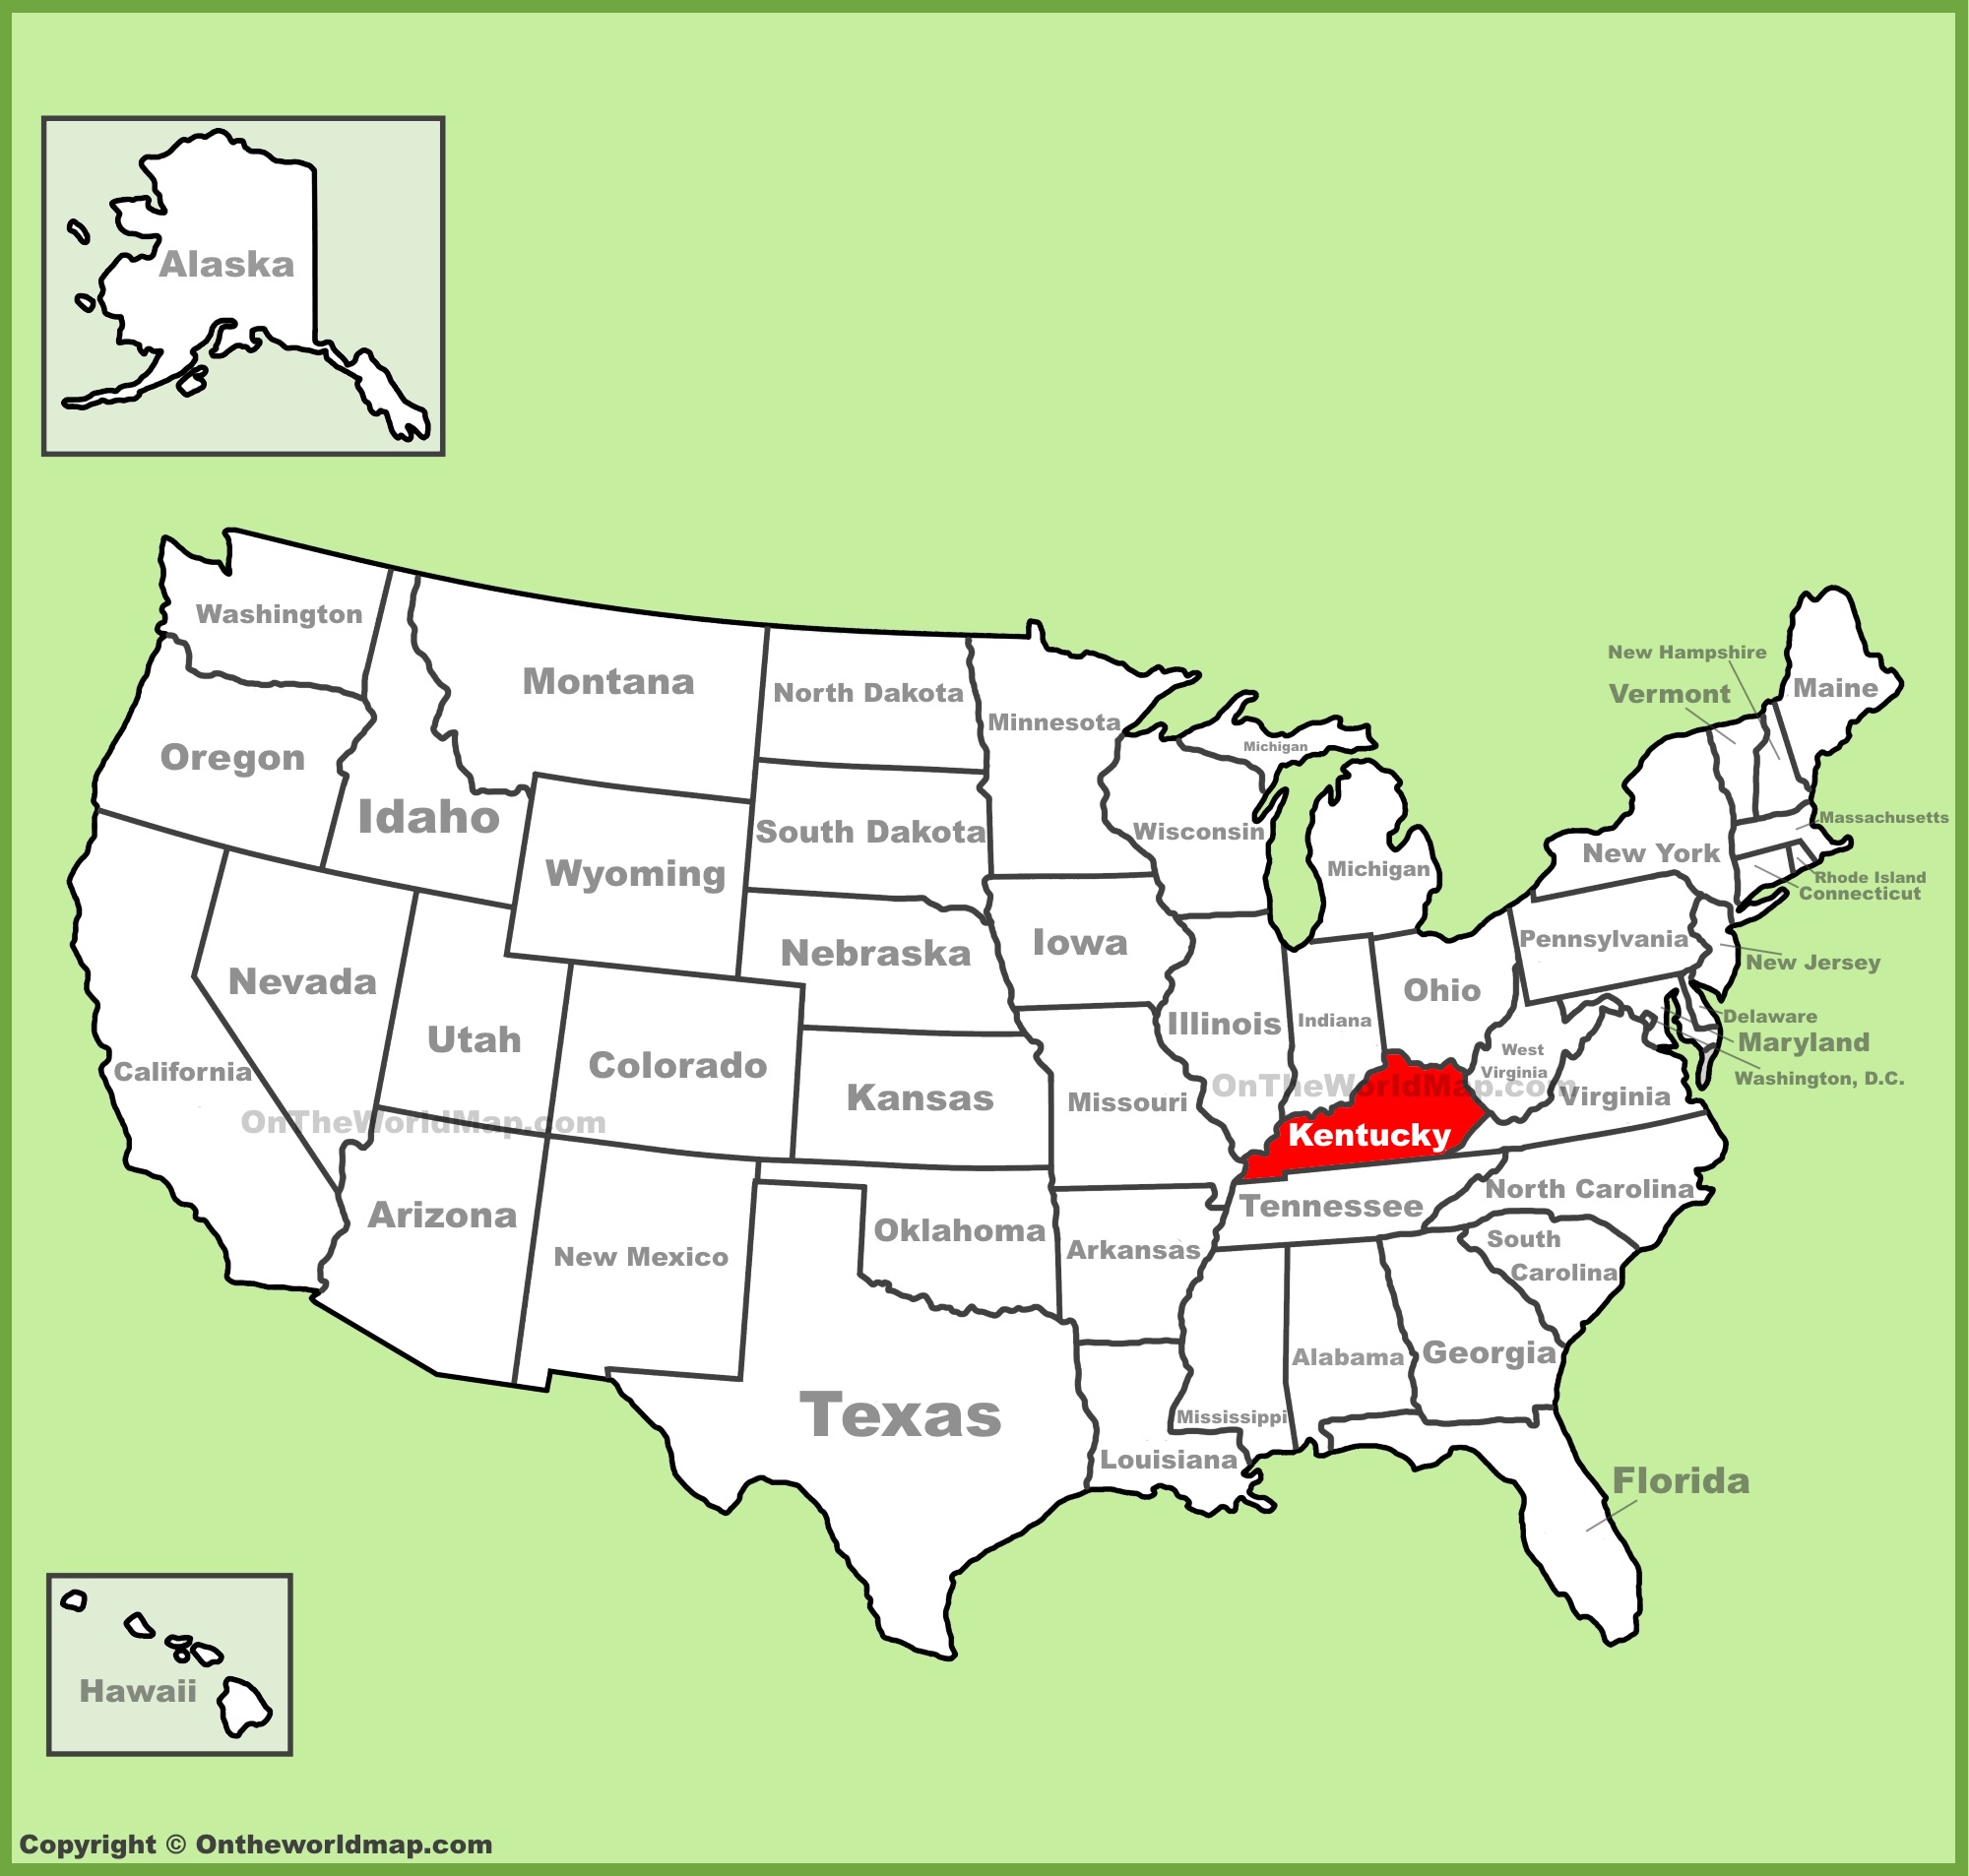 Kentucky location on the U.S. Map ﻿